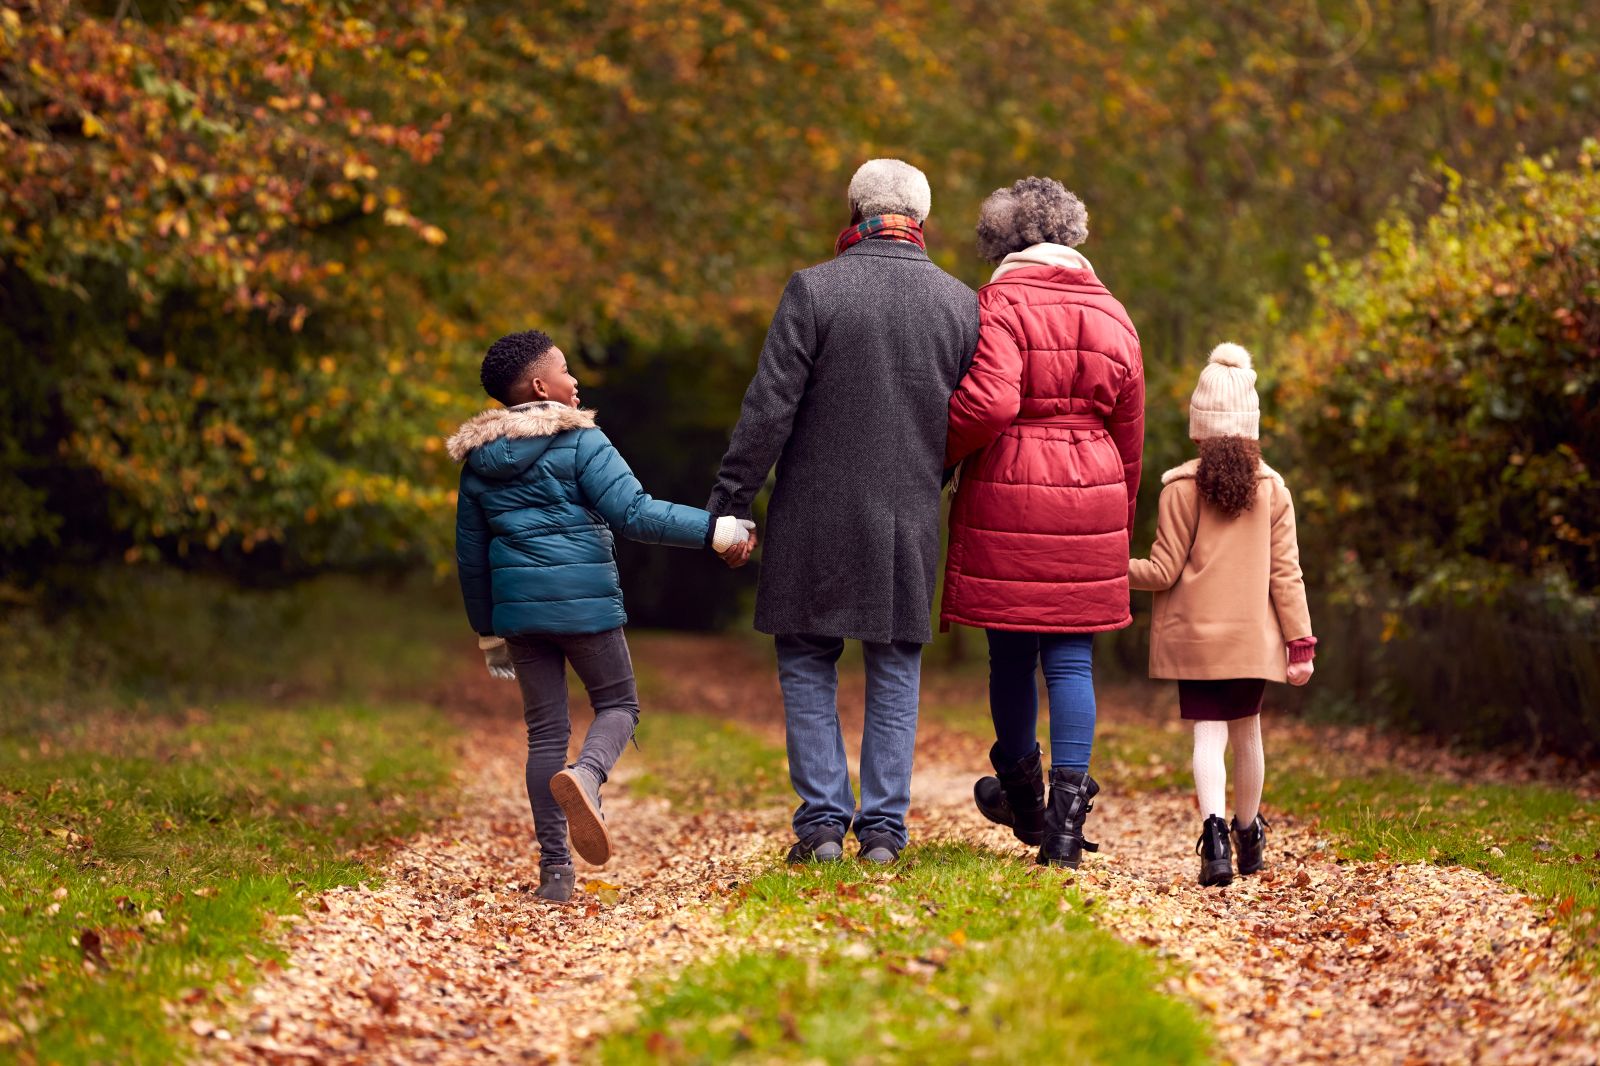 Rear view of grandparents holding hands with grandchildren on walk through autumn countryside